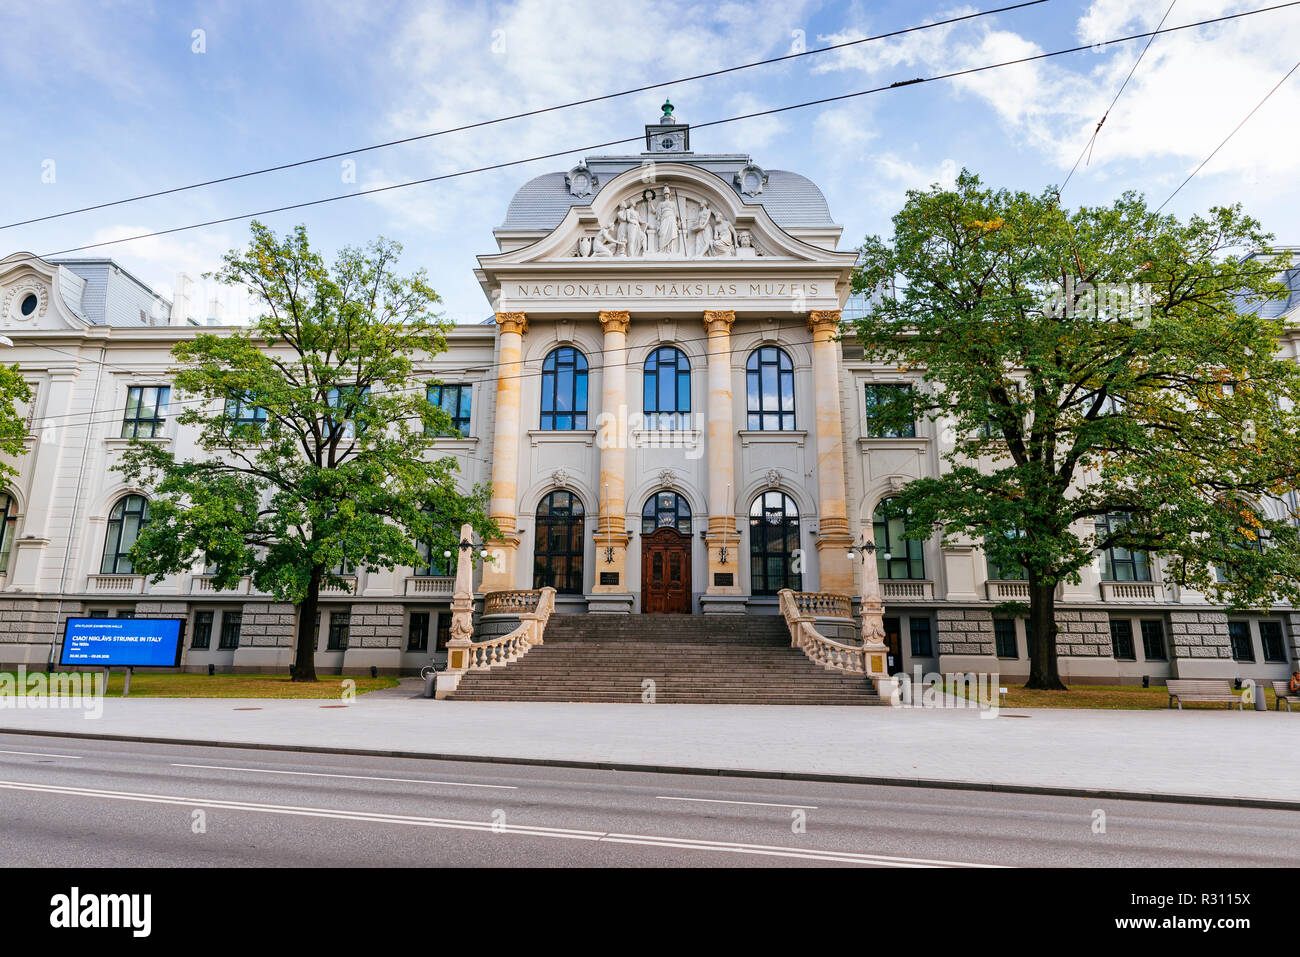 The Latvian National Museum of Art is the richest collection of national art in Latvia. Riga, Latvia, Baltic states, Europe. Stock Photo